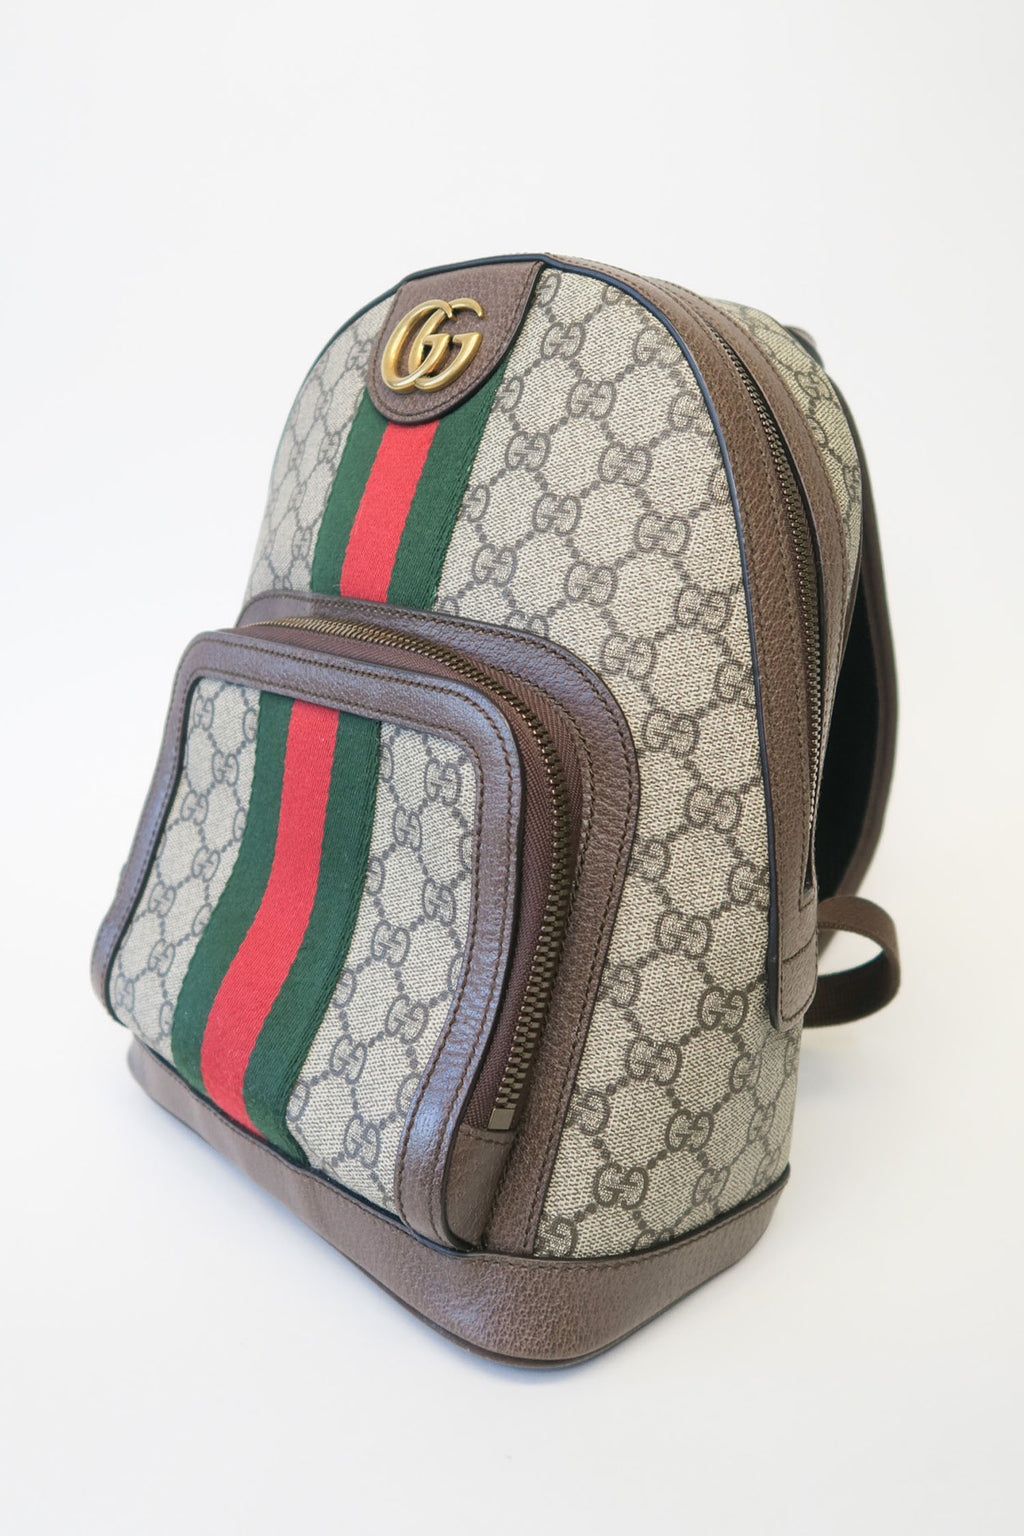 Gucci GG Supreme Small Ophidia Backpack